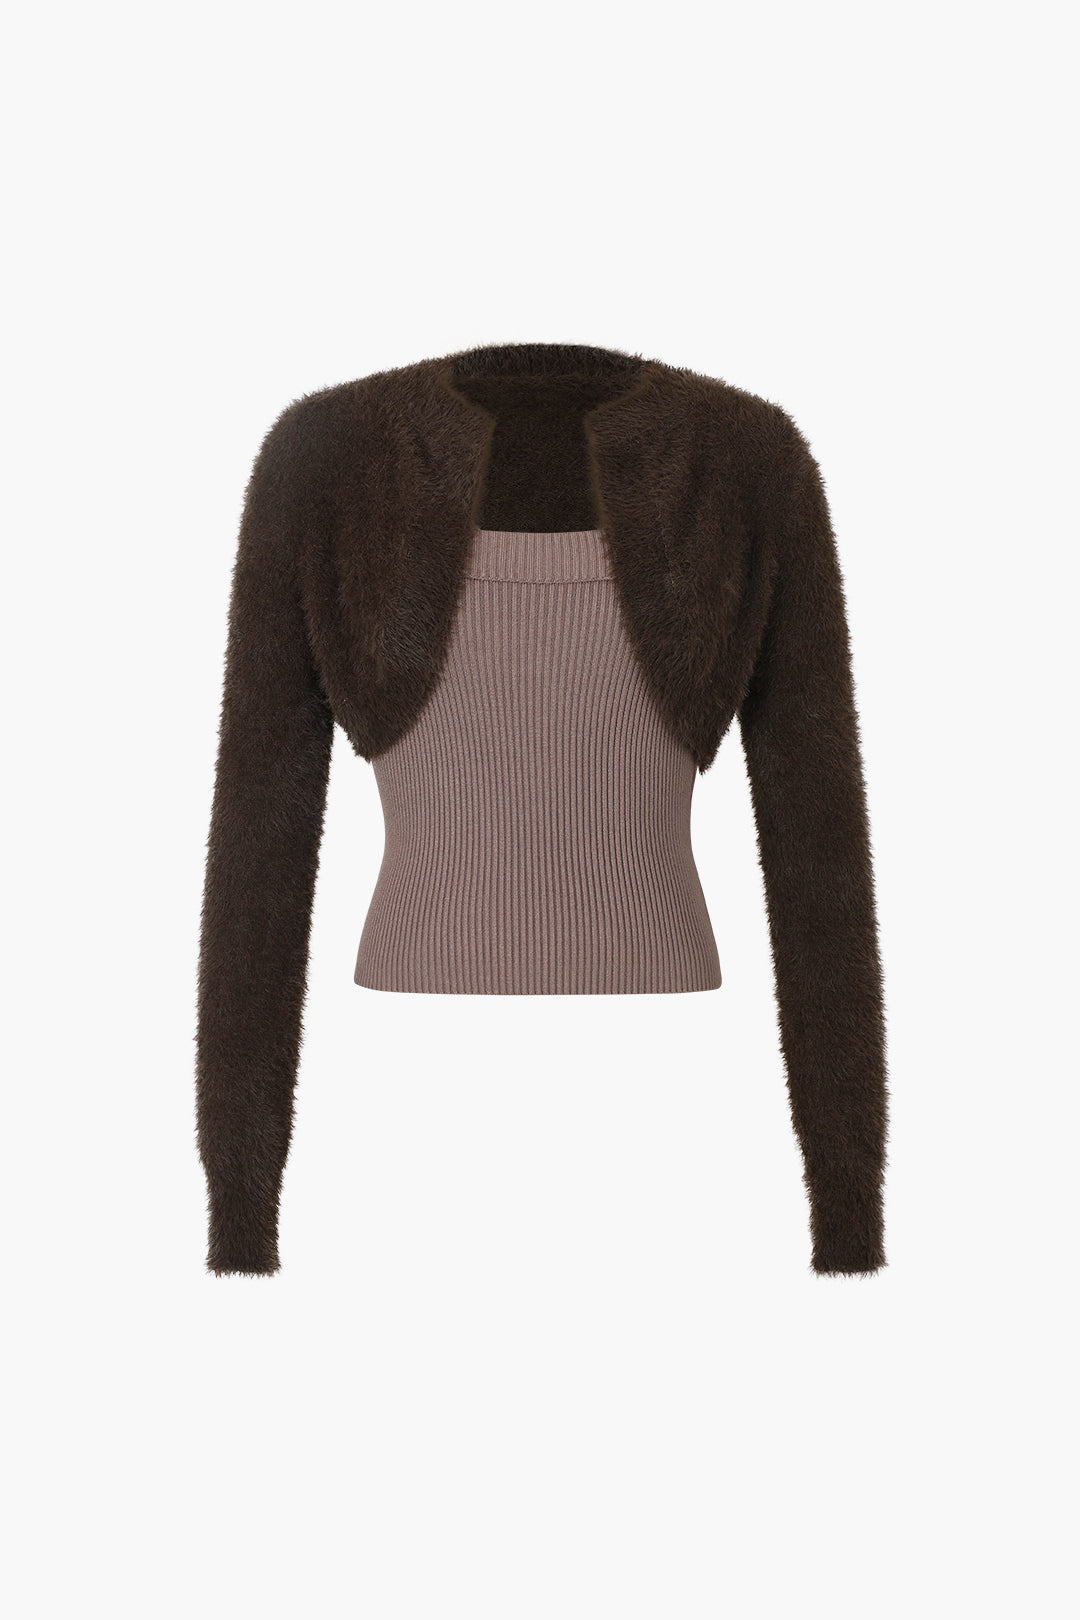 Fuzzy Cropped Shrug And Knit Cami Top Set